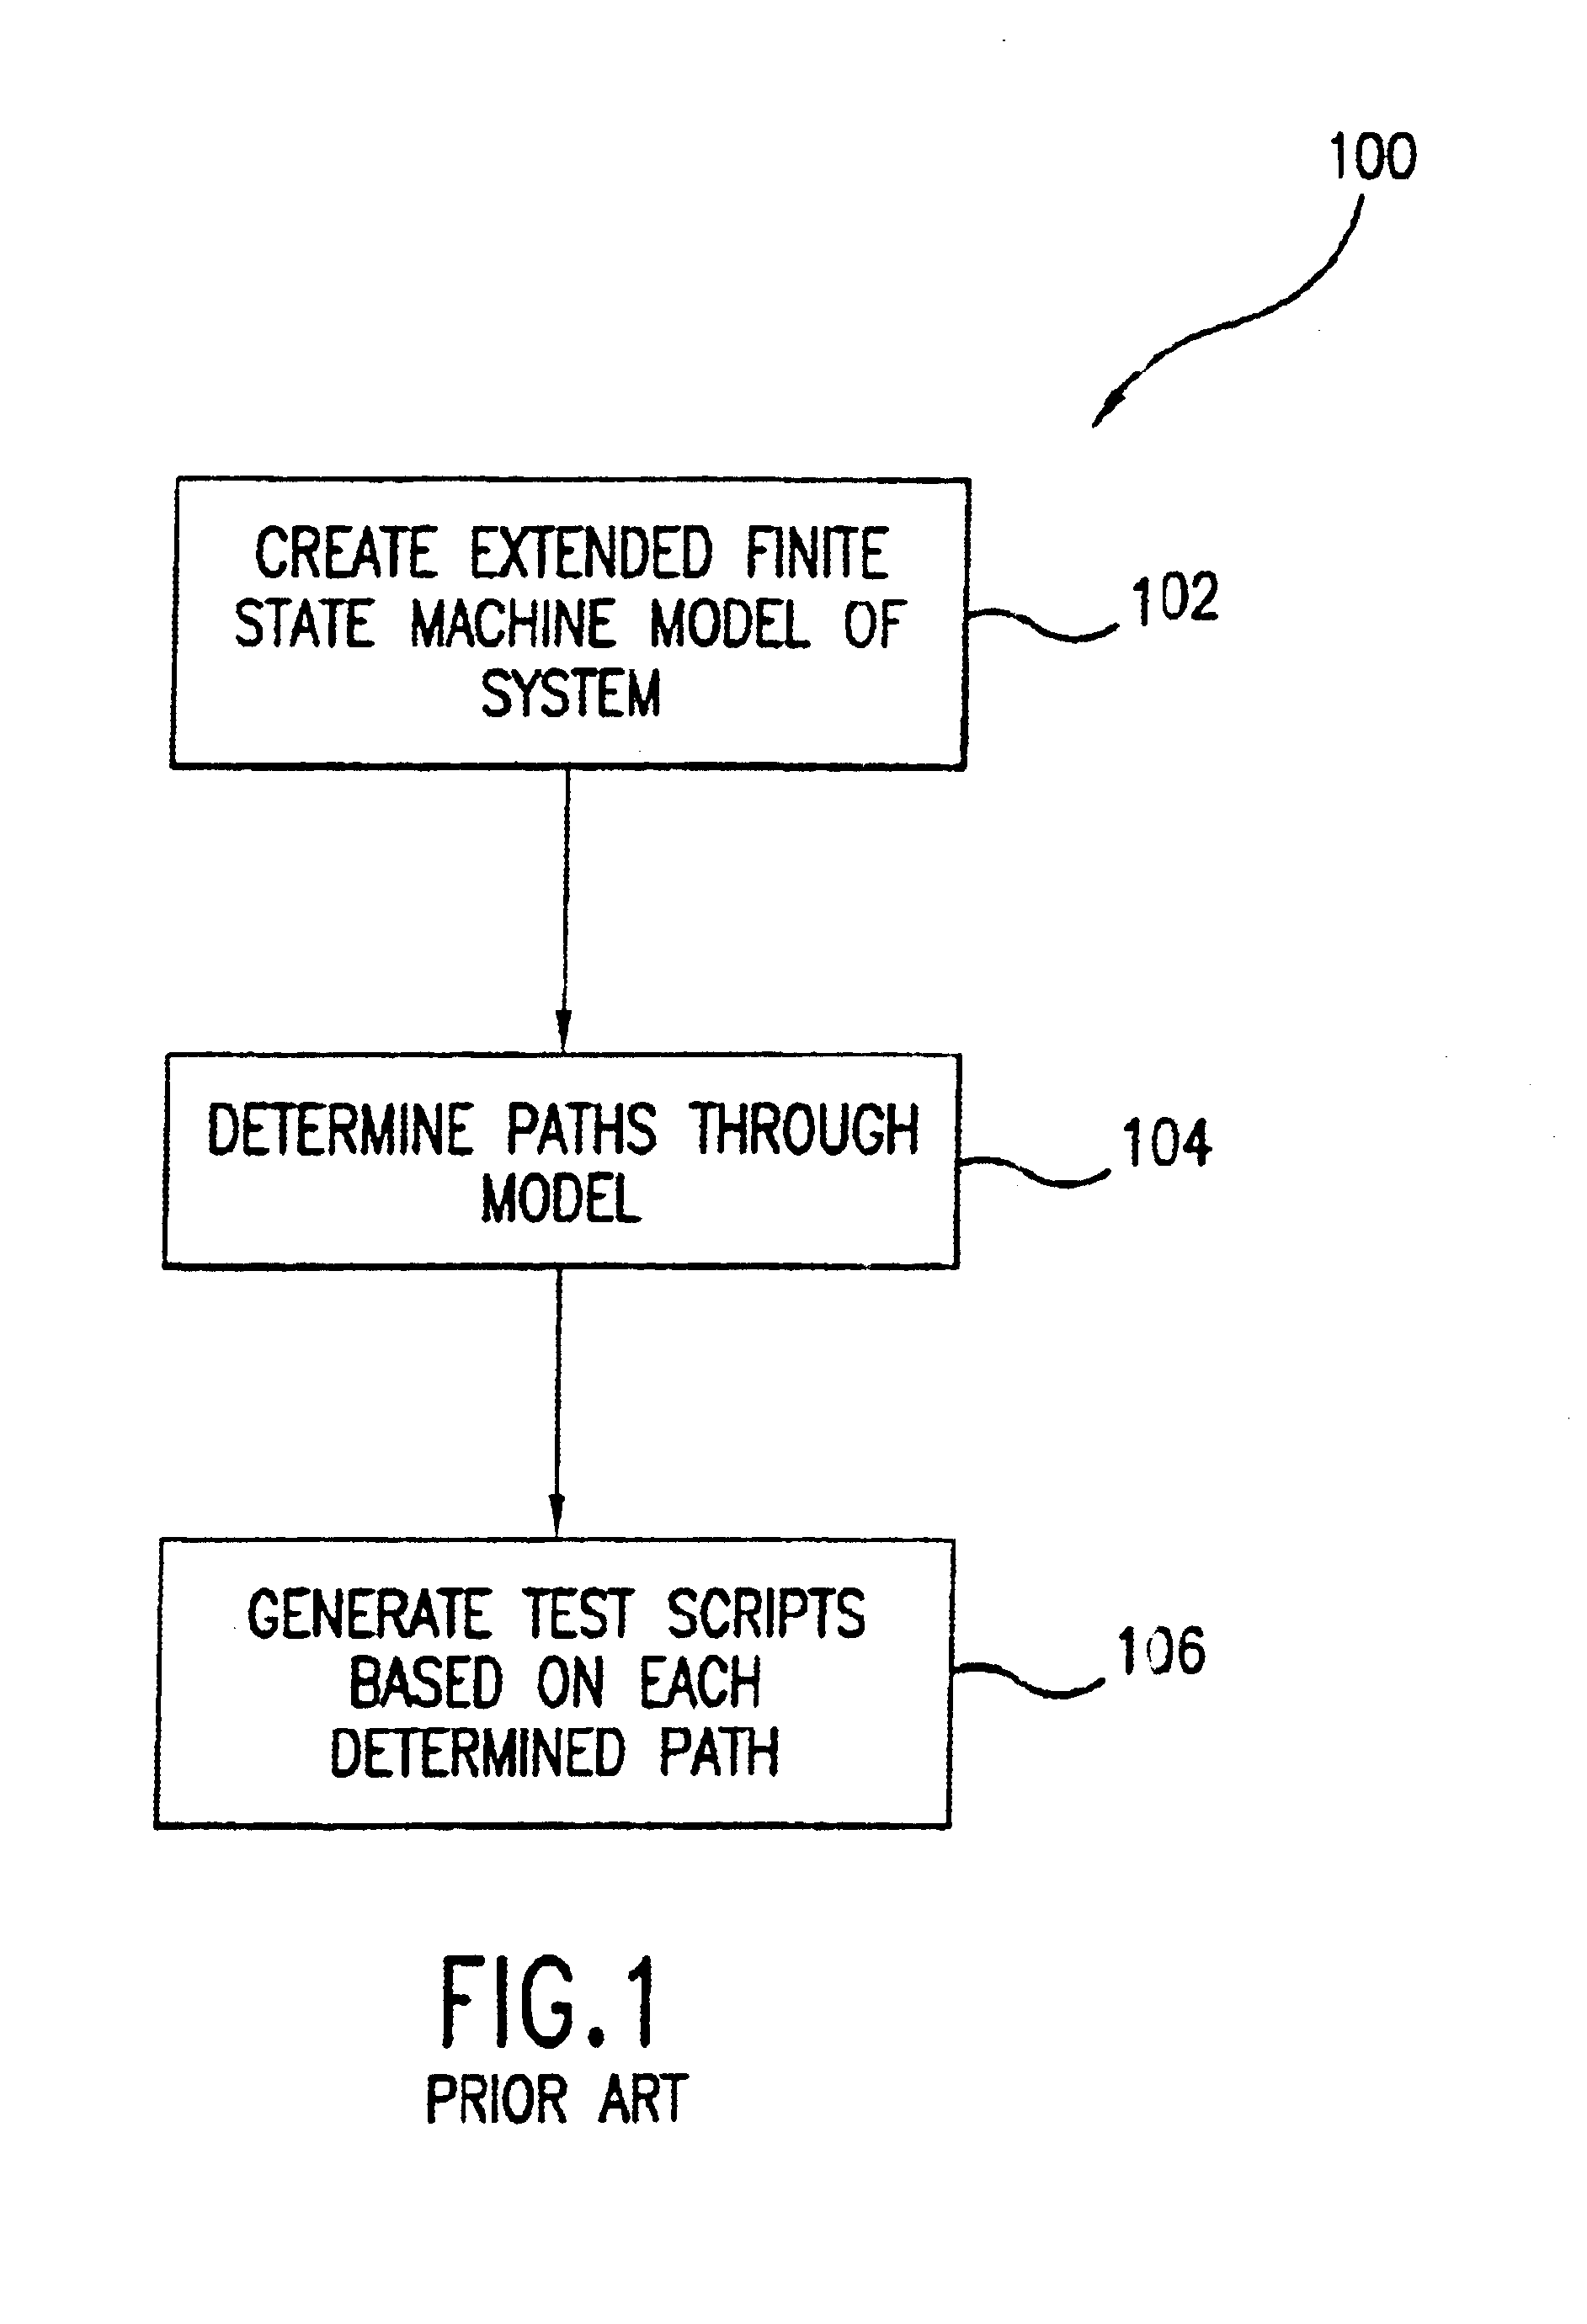 Analyzing an extended finite state machine system model